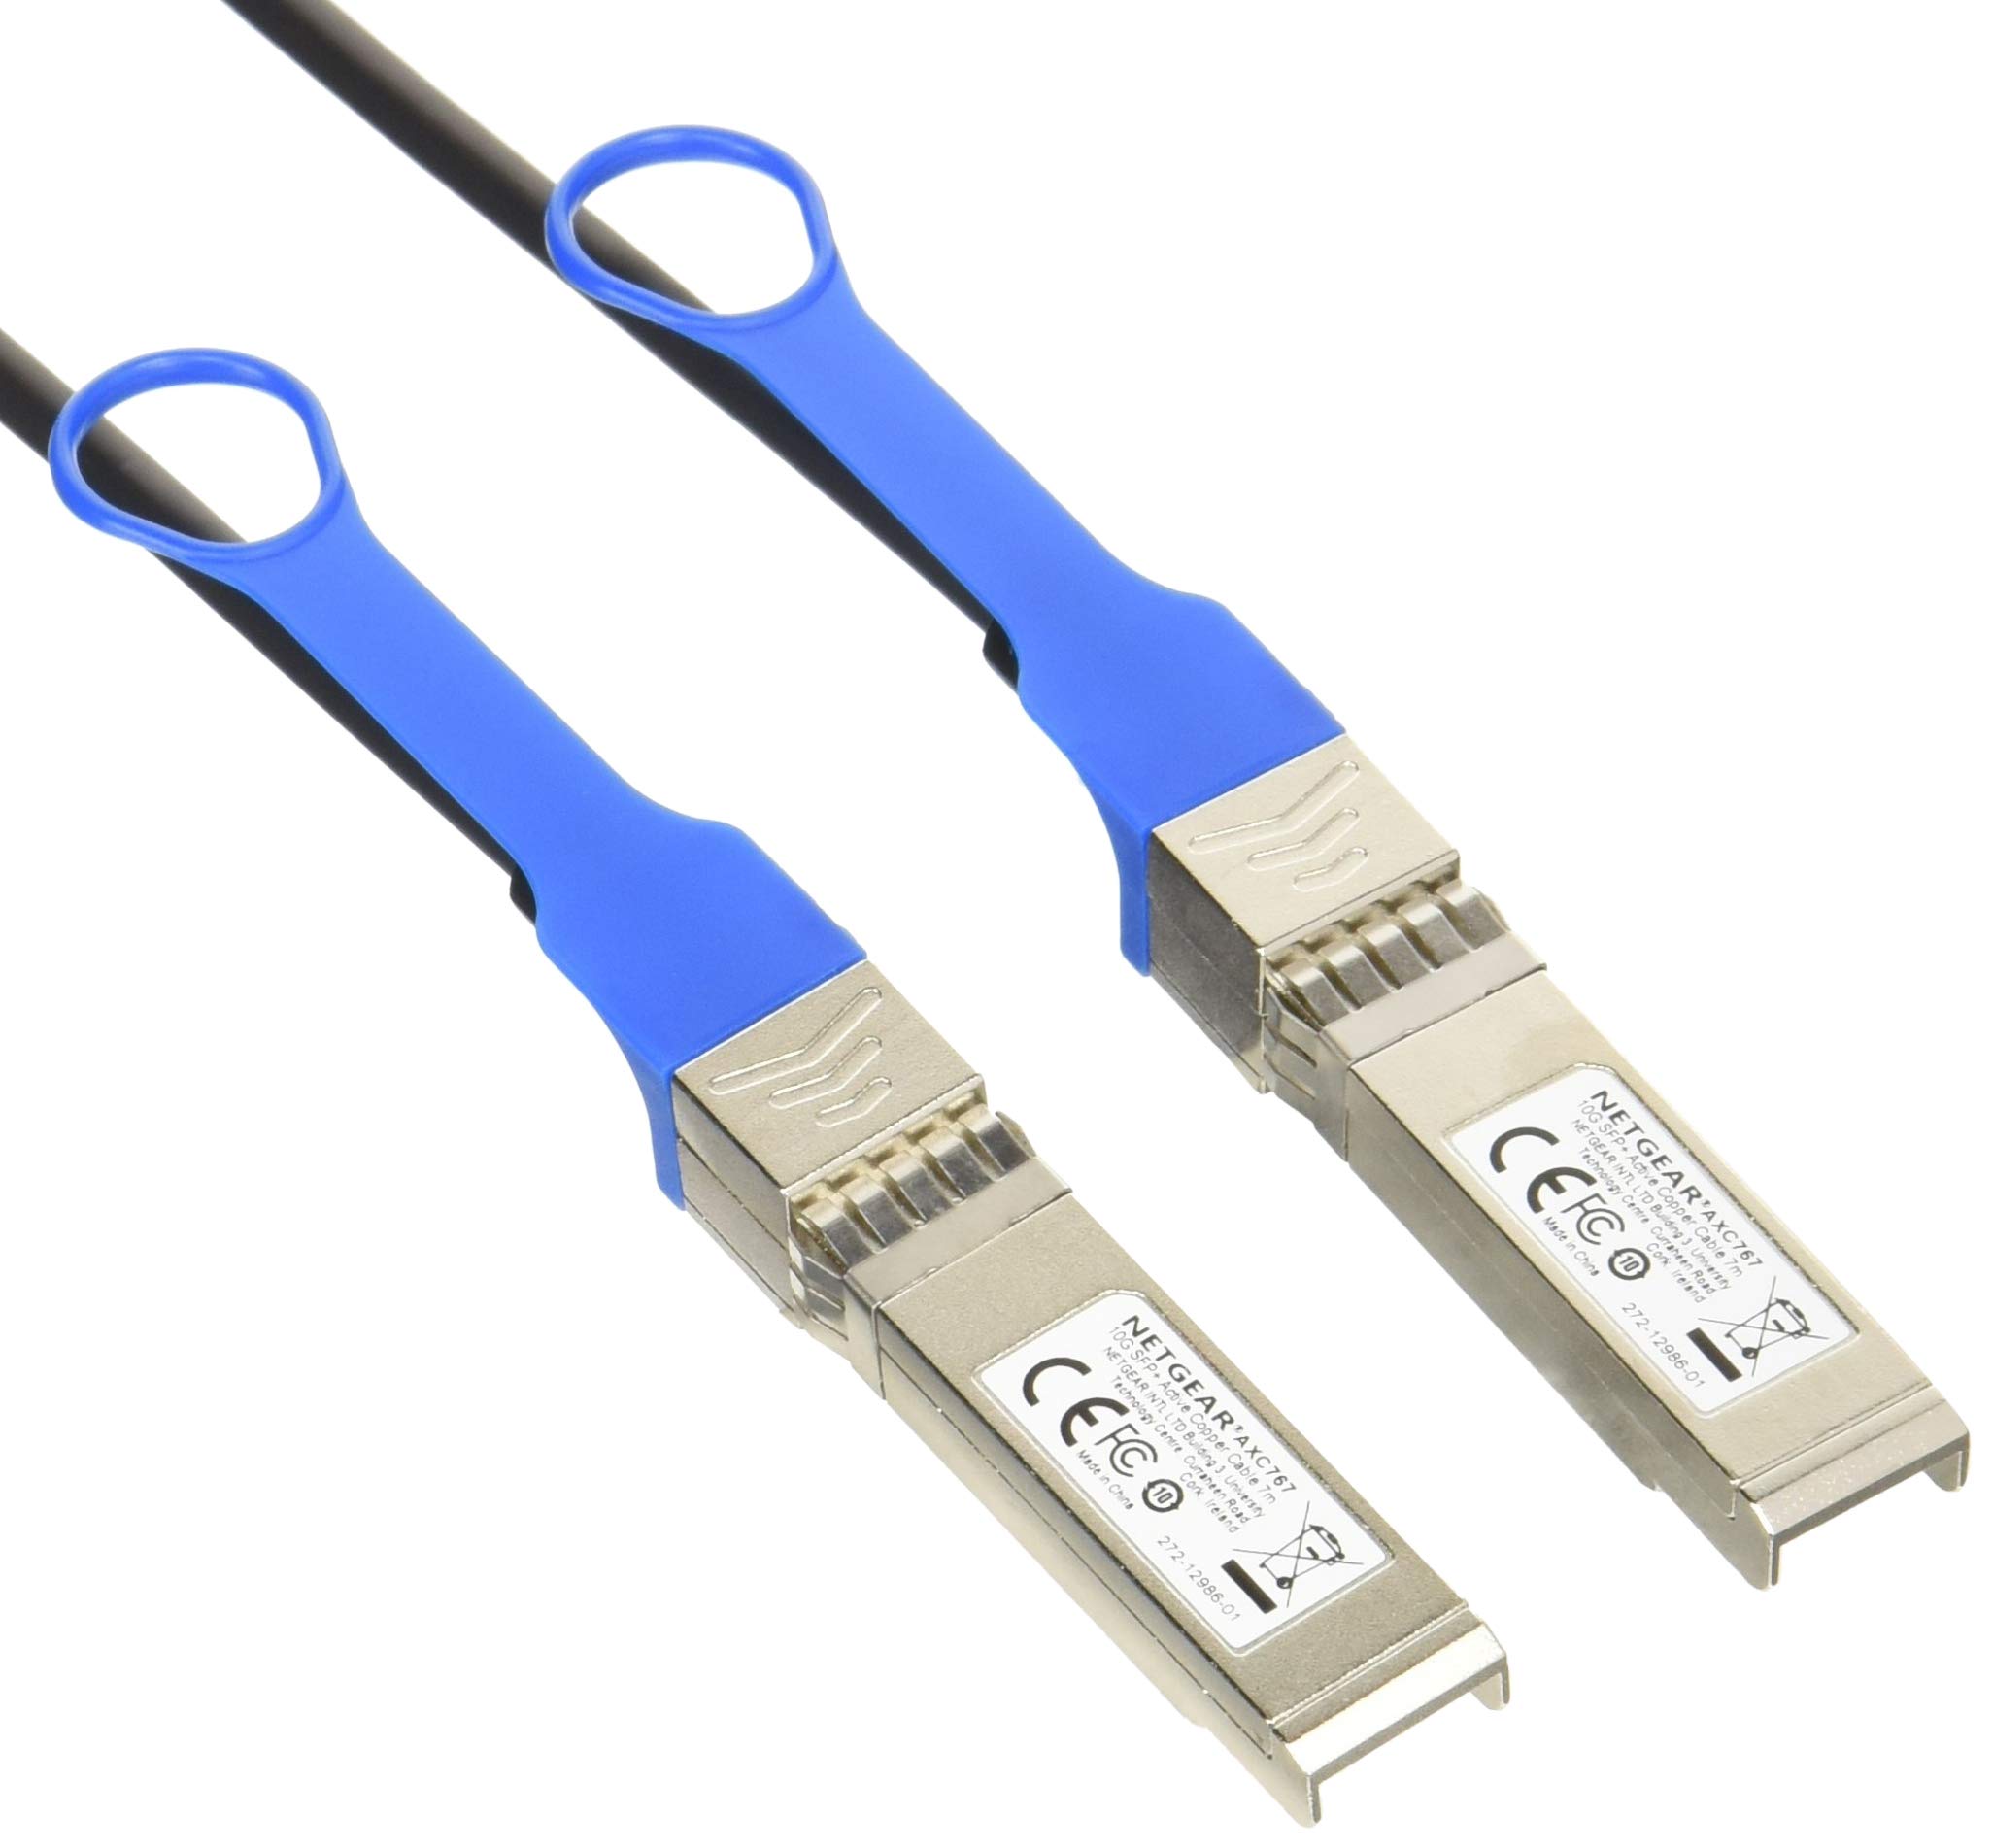 DIRECT ATTACH CABLE 7M (AXC767)